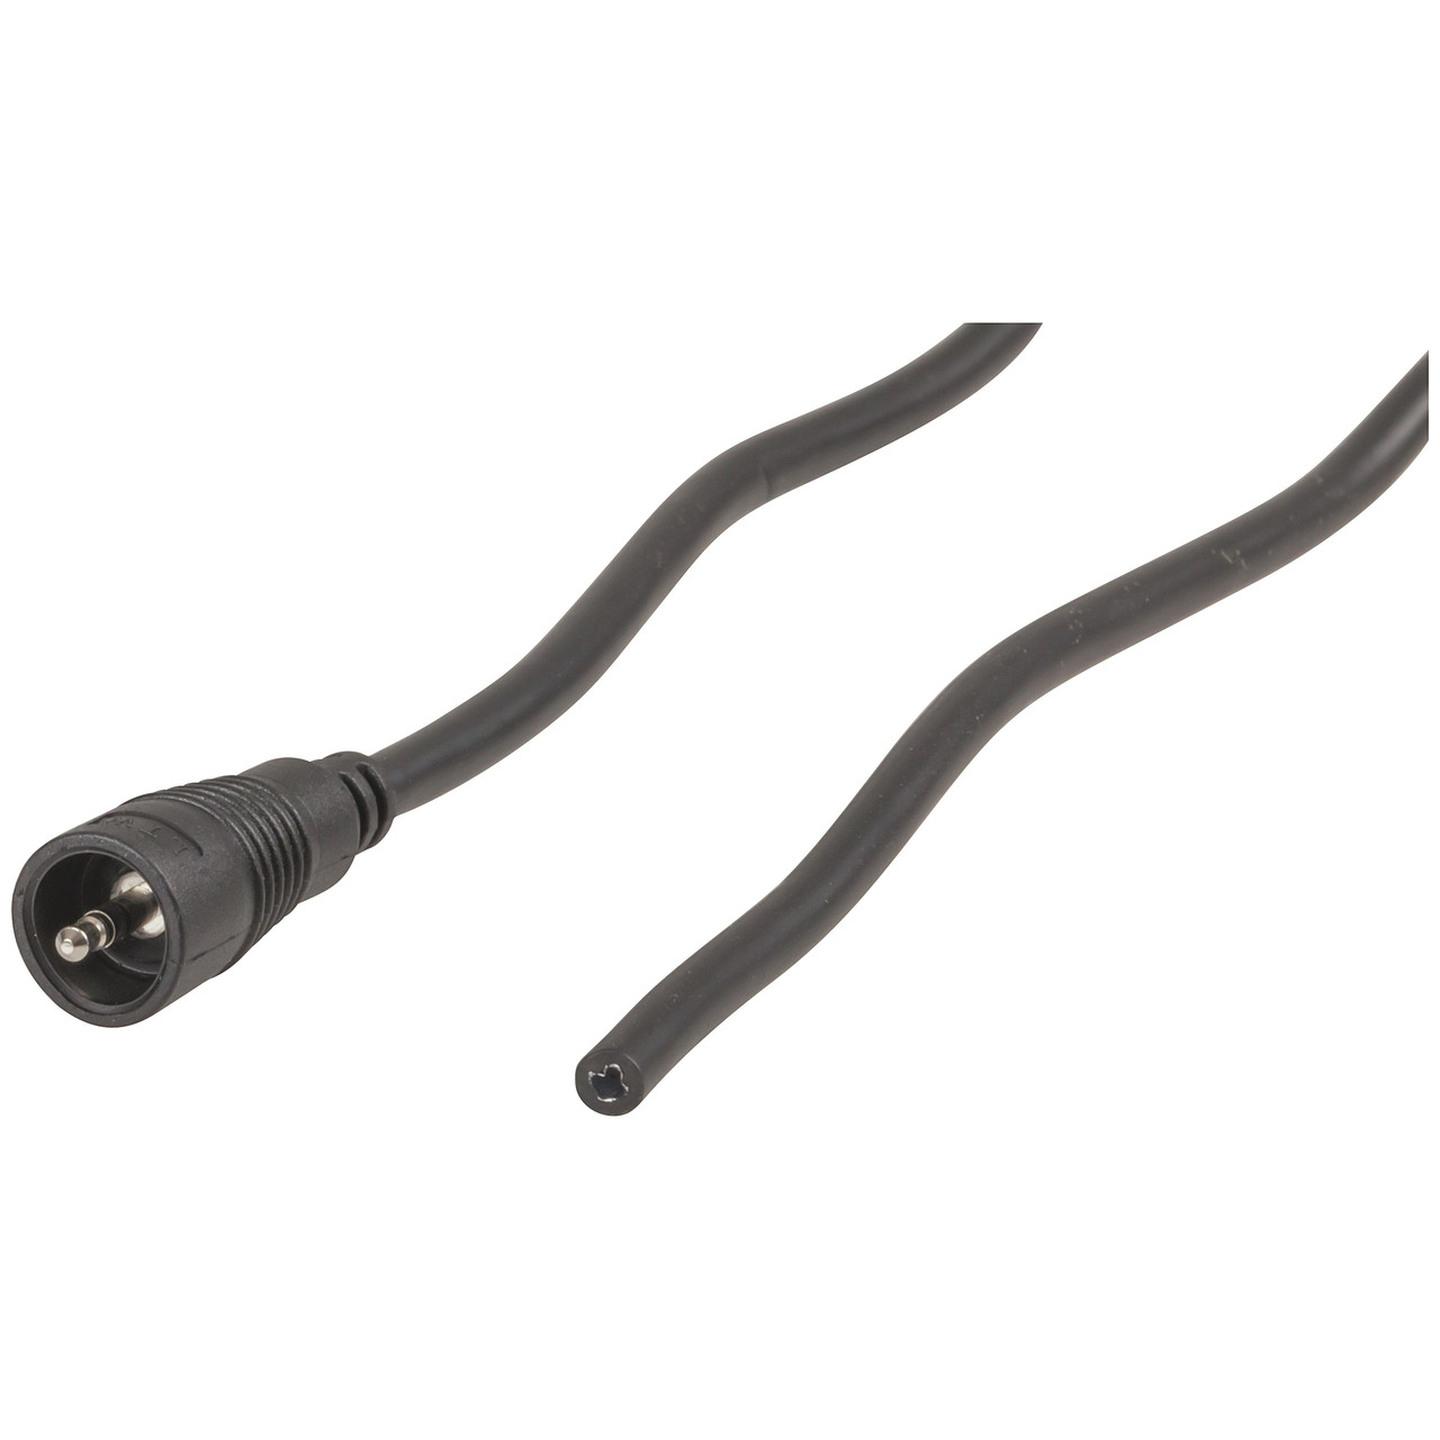 IP67 2.5mm Stereo Line Plug with 1m Cable